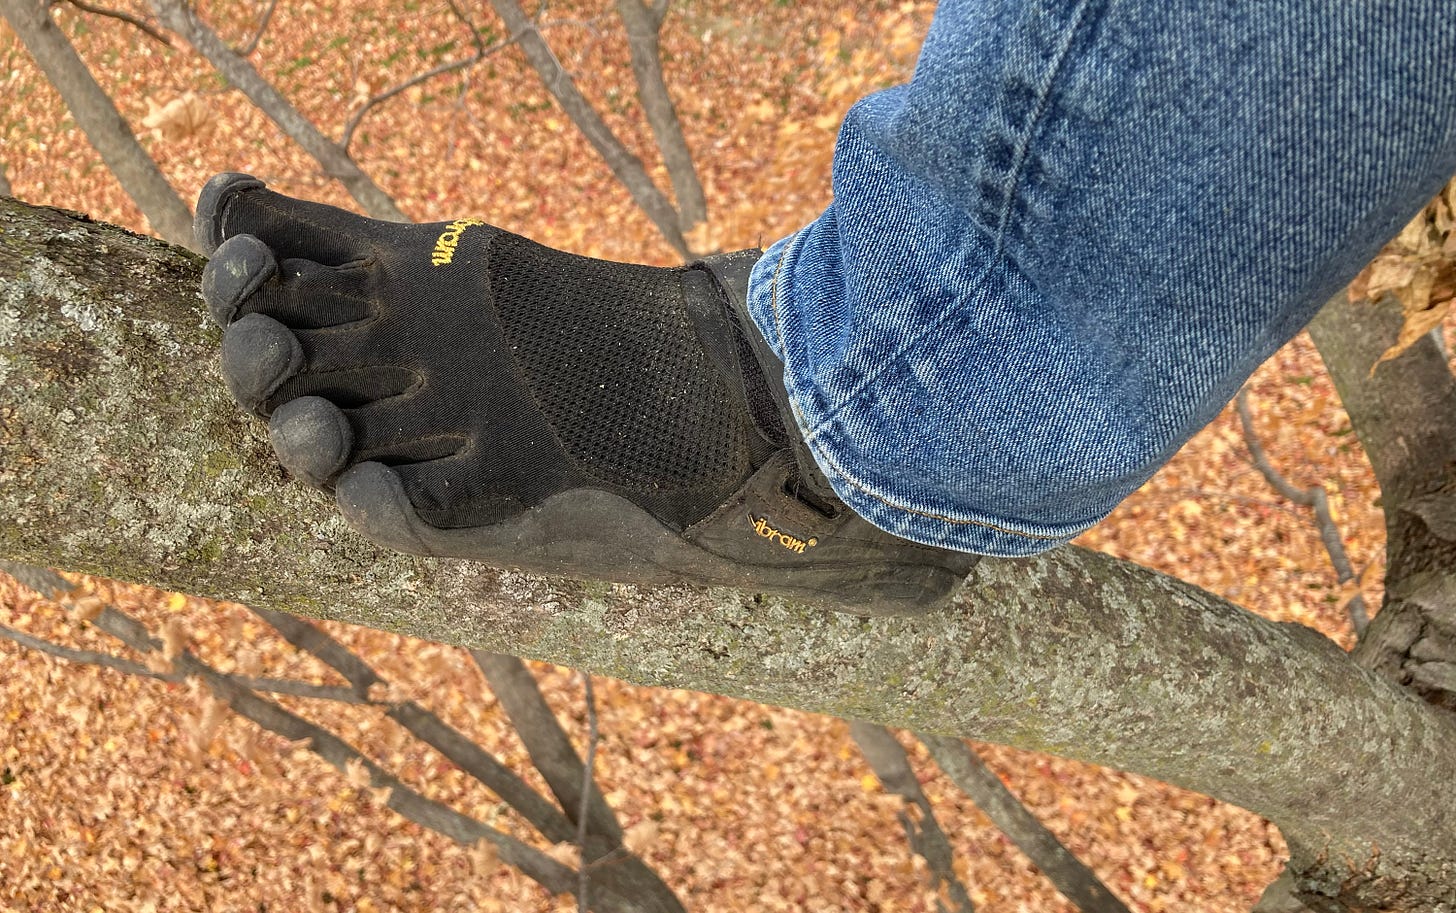 My foot, wearing Vibram shoes, standing on a branch.